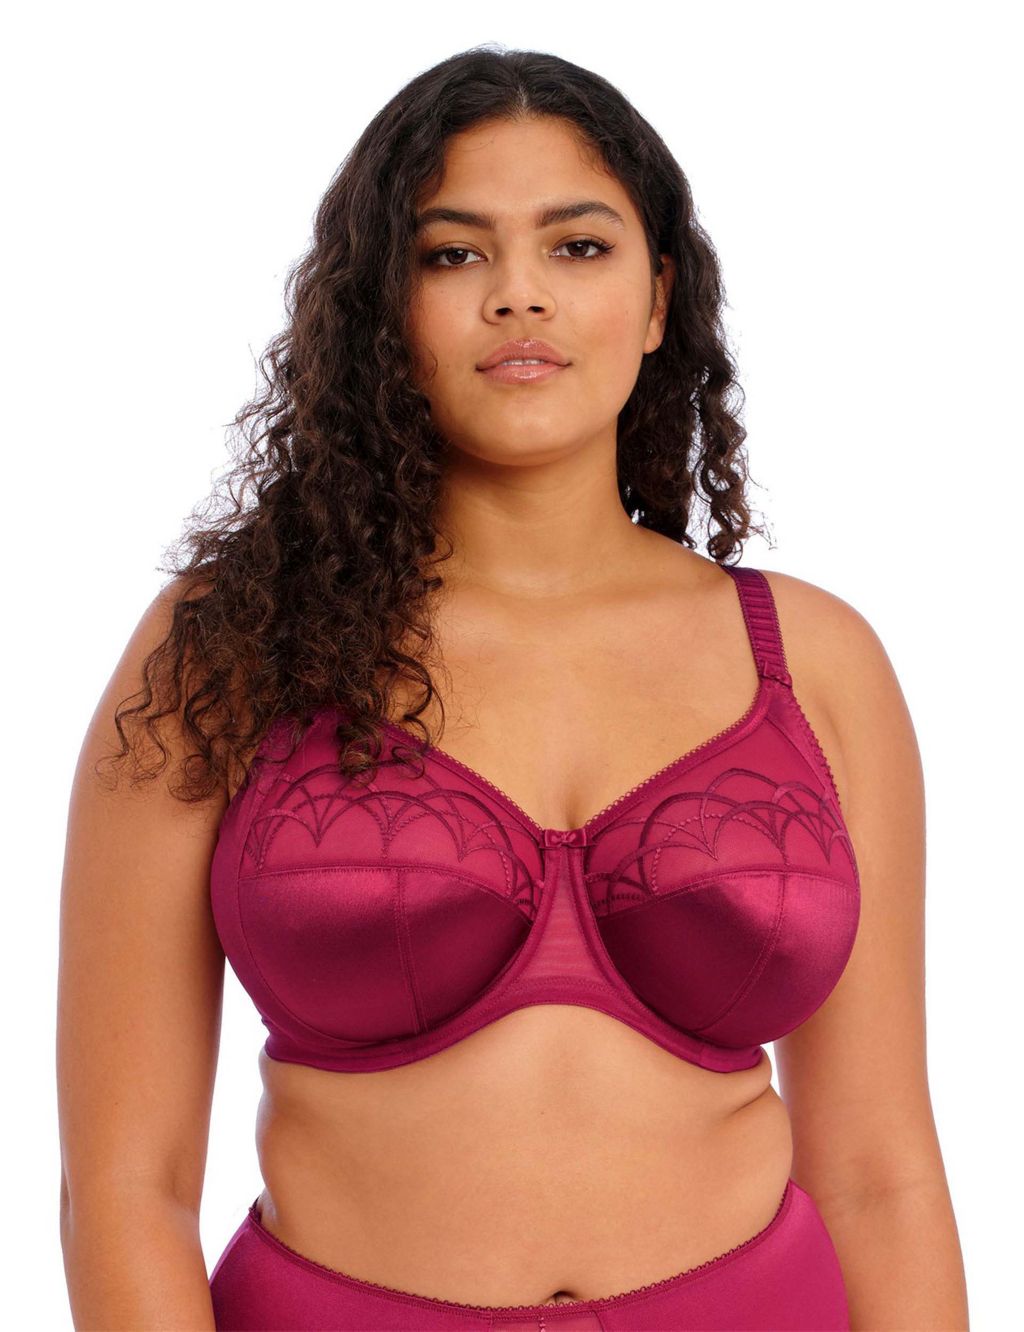 Cate Wired Full Cup Bra DD-K image 3